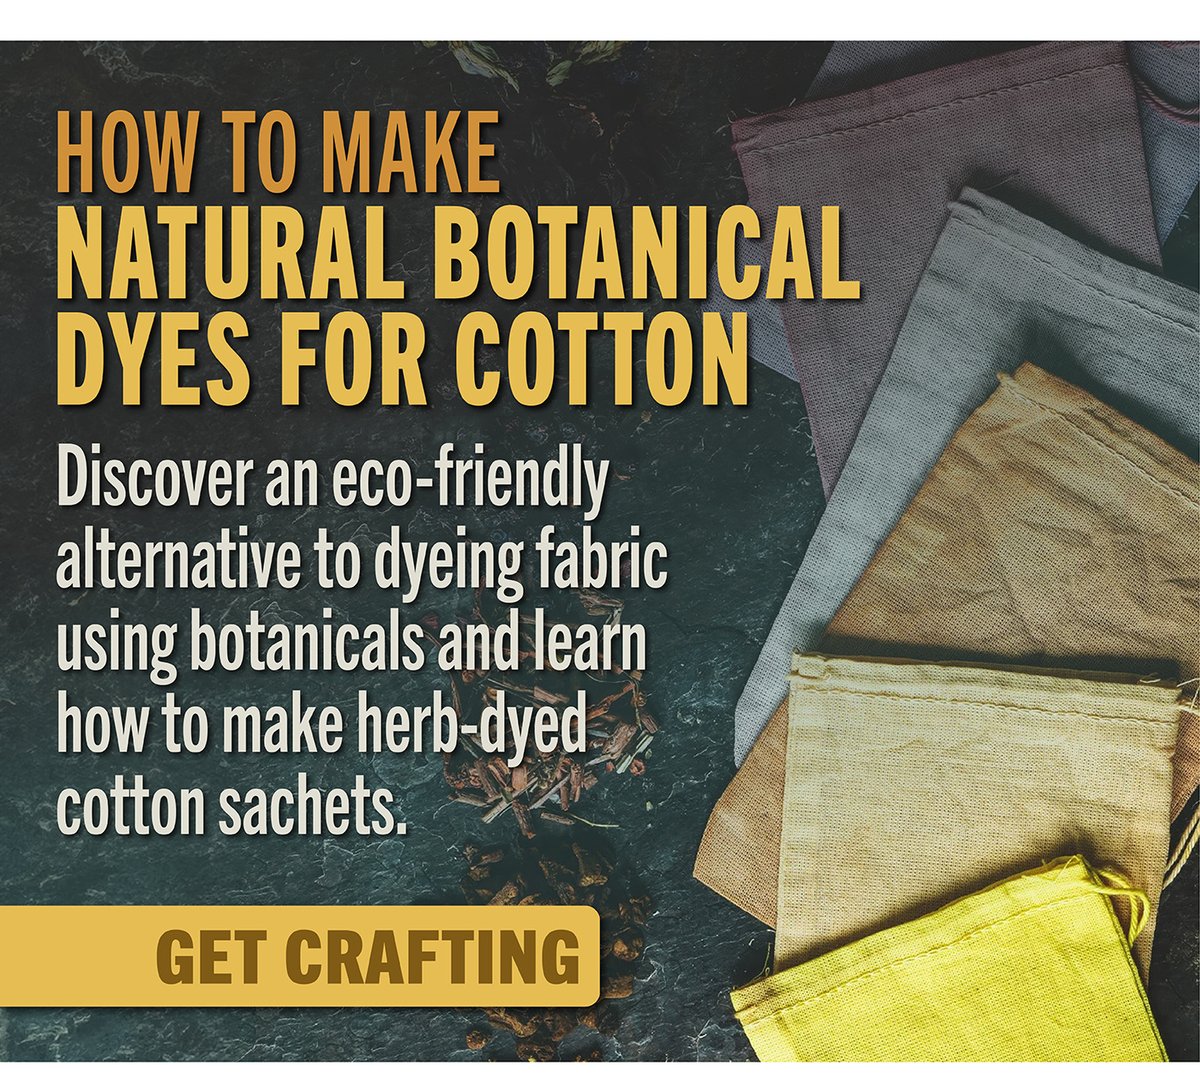 Natural Botanical Dyes for Cotton